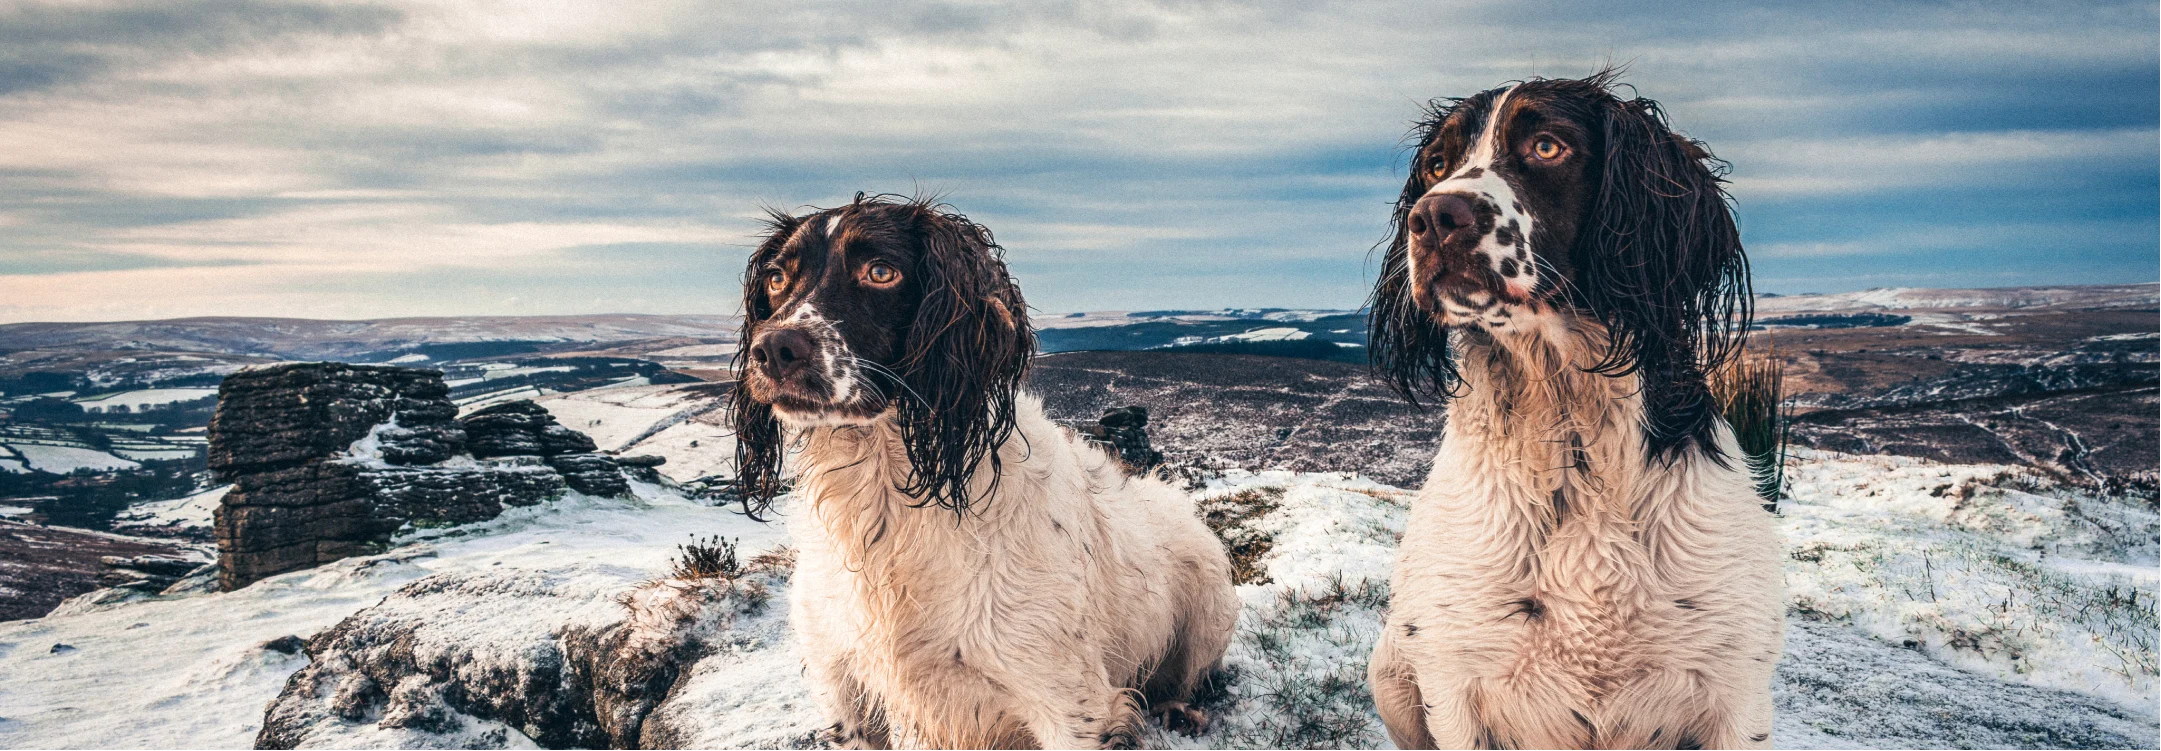 photo of two identical looking wet long haired dogs standing alert on top of a snowy mountain